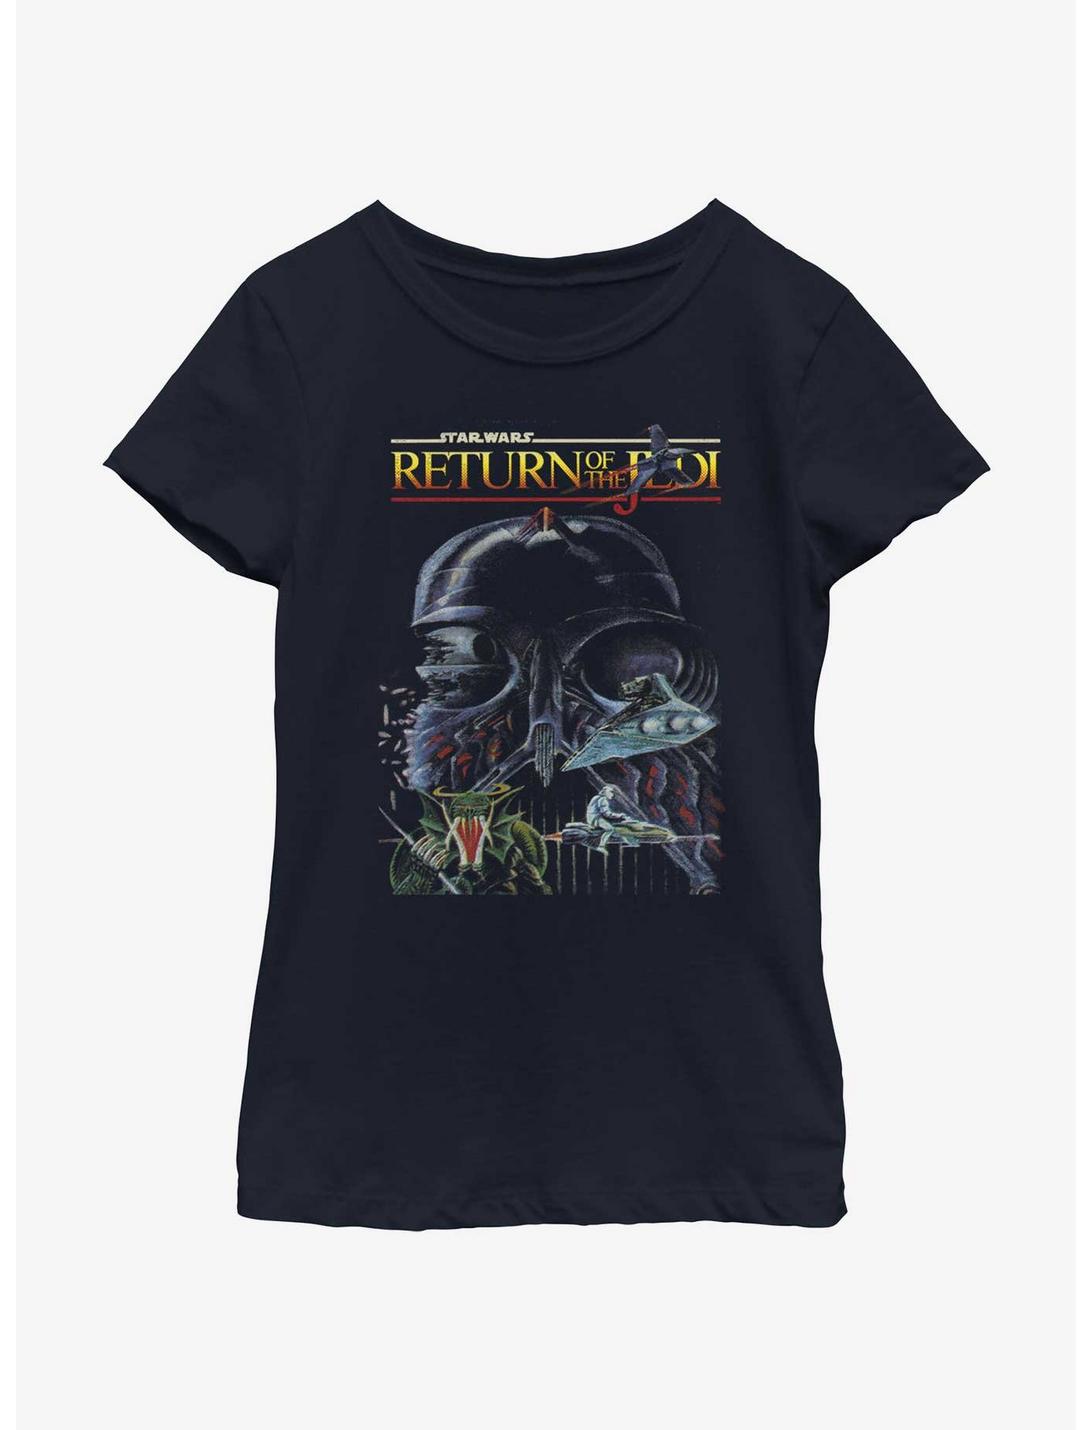 Star Wars Return Of The Jedi Concept Art Poster Youth Girls T-Shirt, NAVY, hi-res